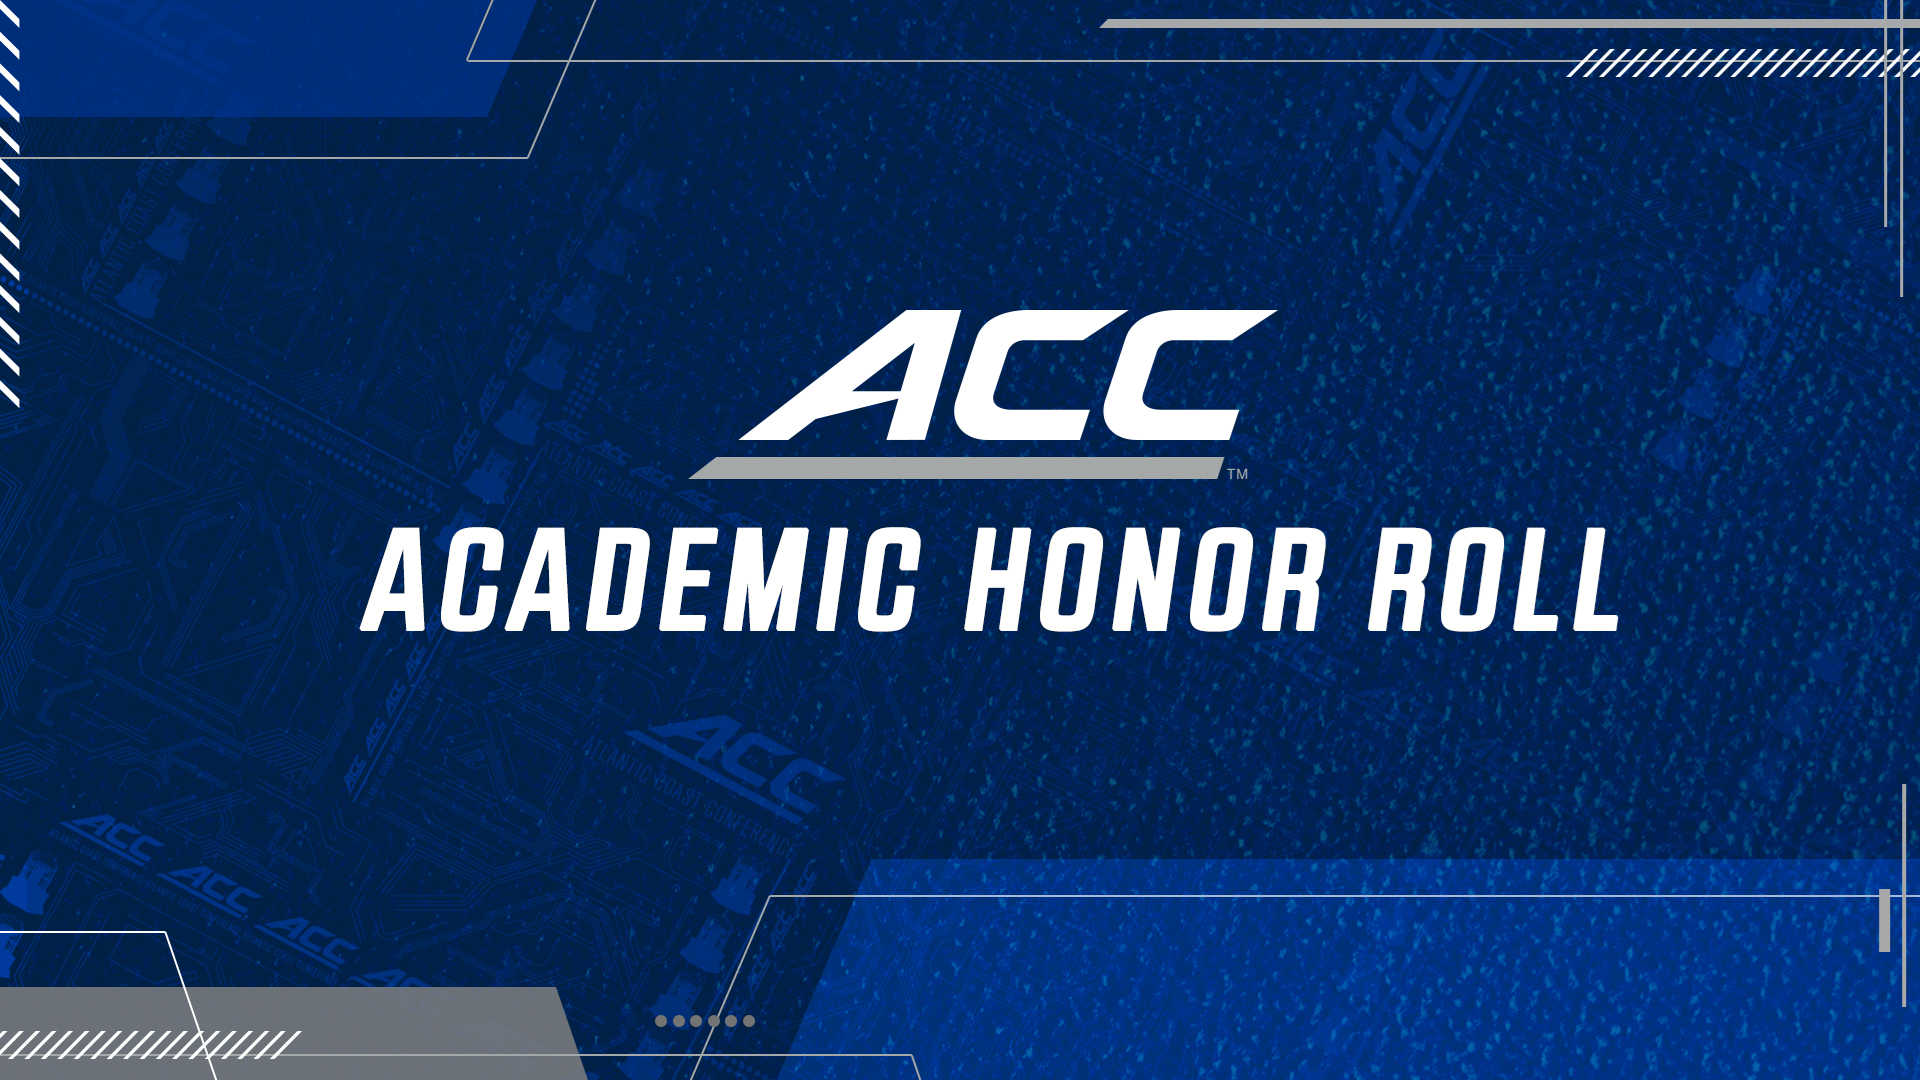 Record 6,187 Student-Athletes Named to ACC Academic Honor Roll